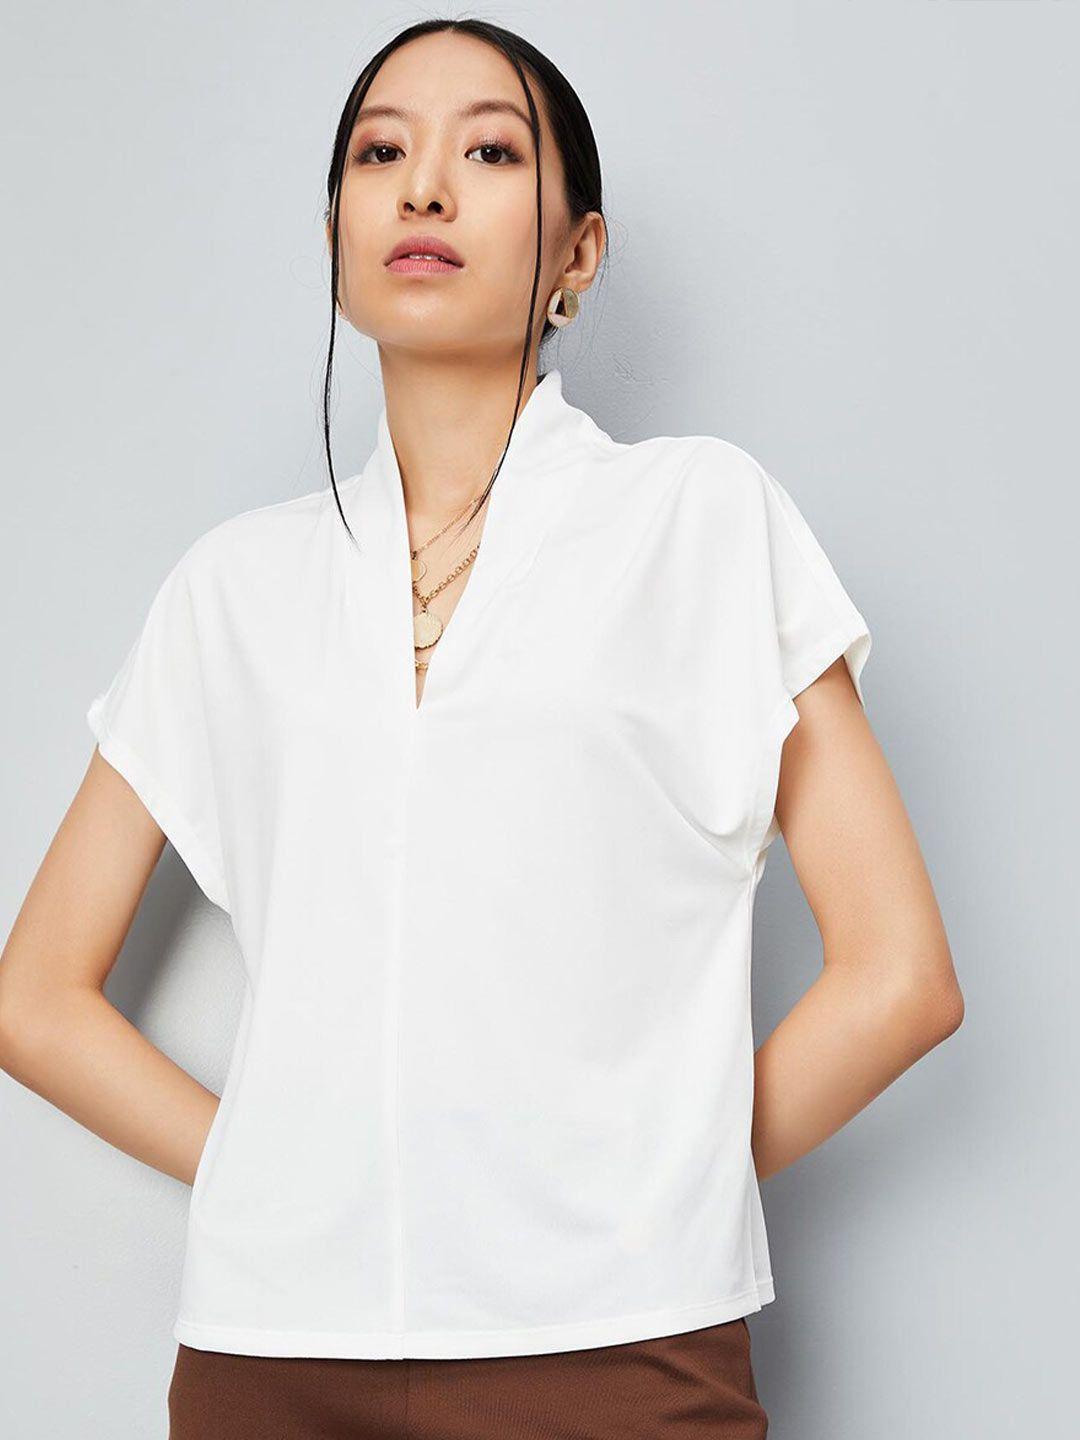 max-v-neck-extended-sleeves-top